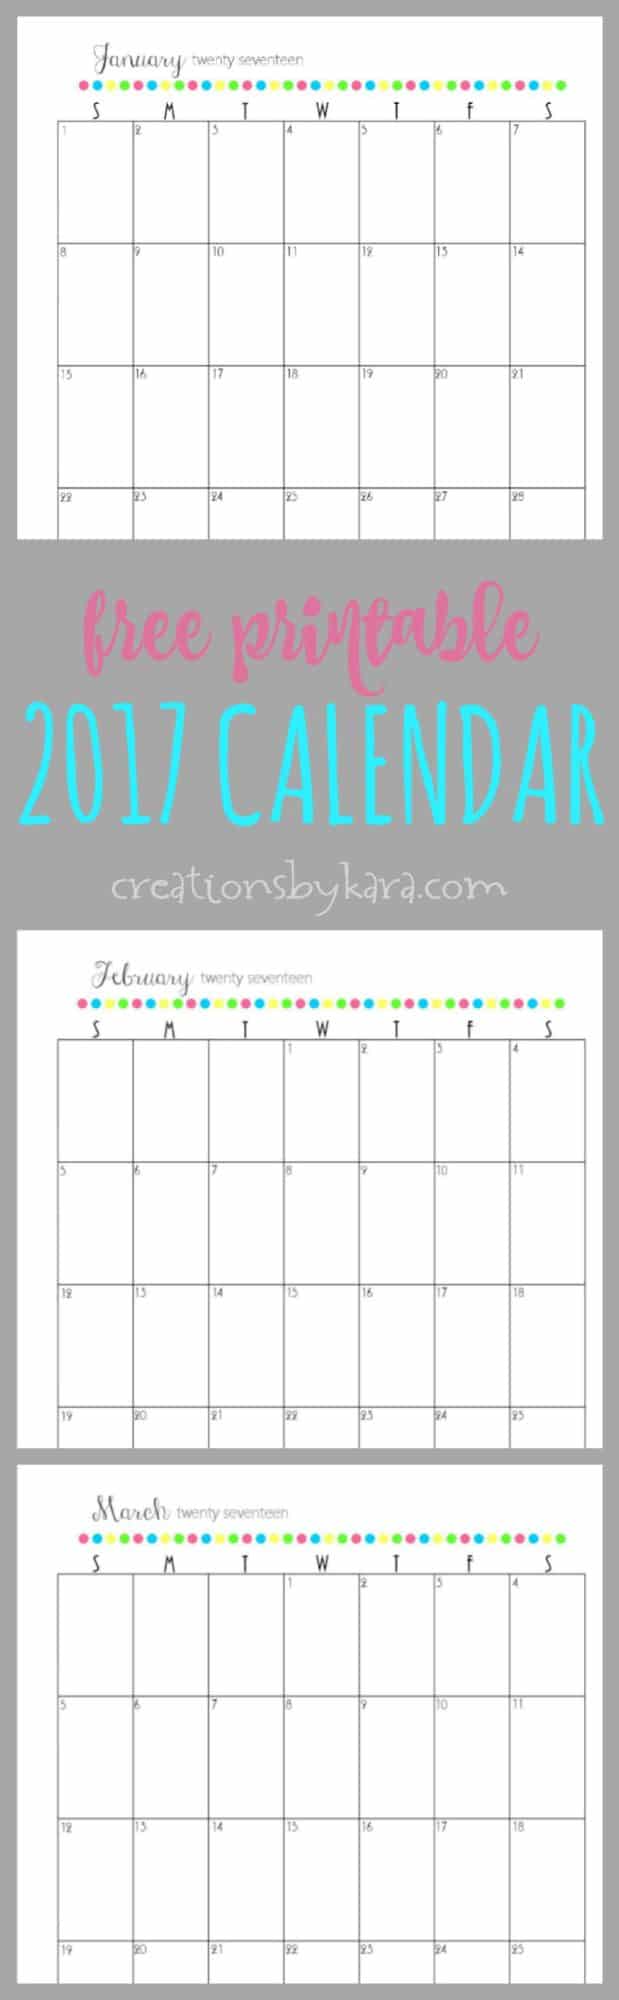 Free printable 2017 calendar - perfect for scheduling and organizing. A simple blank calendar that can be used in a 3-ring binder. 